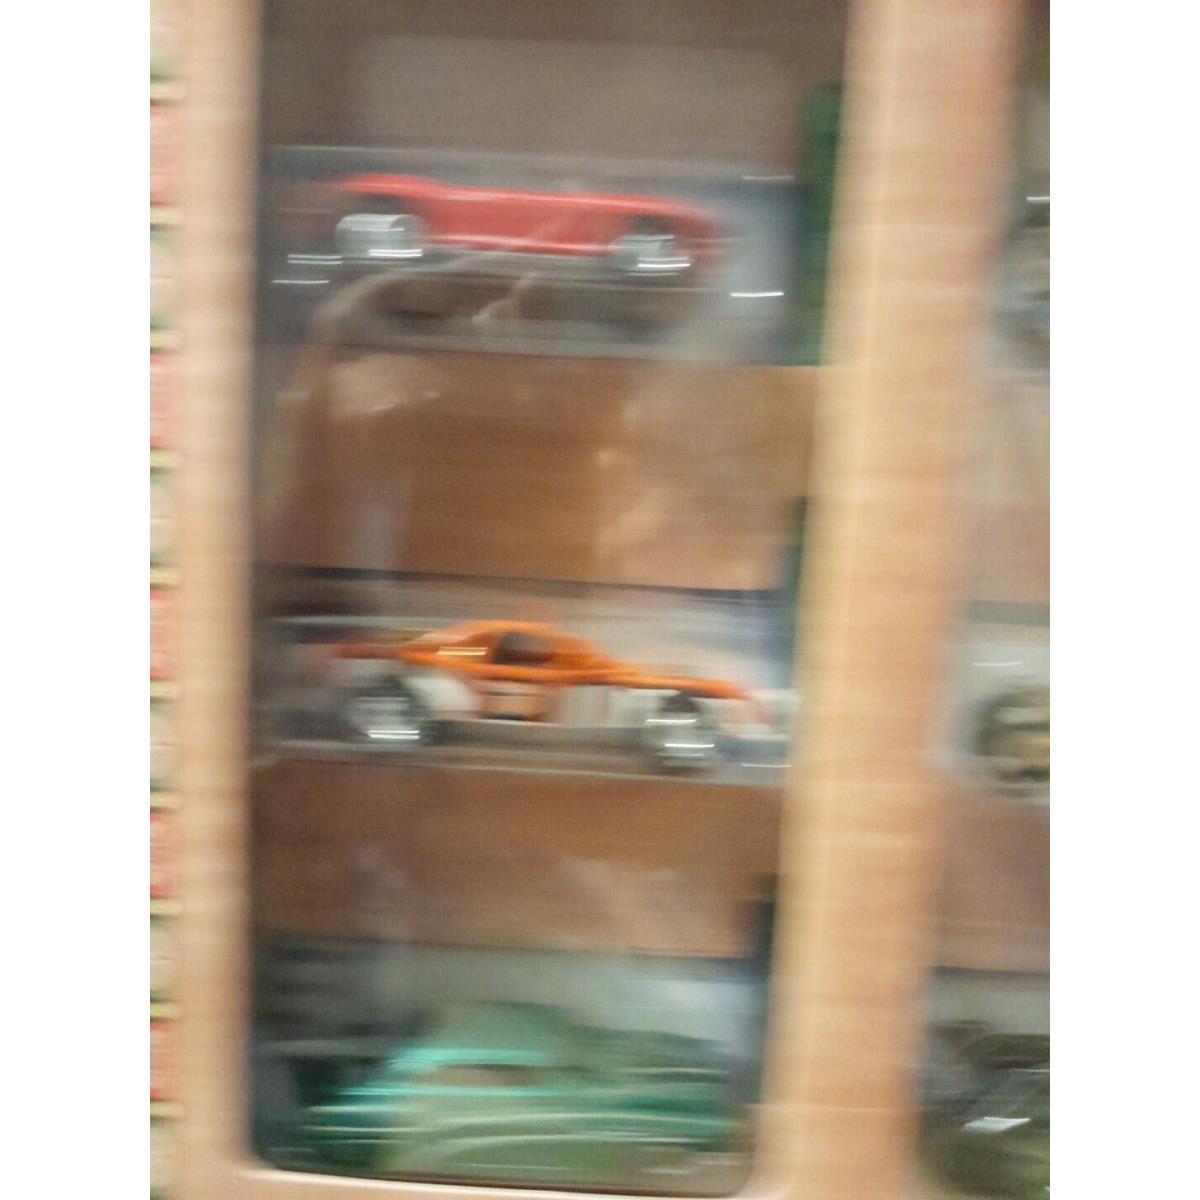 2001 Hot Wheels Jcpenney Treasure Hunt Set Rlc Limited Edition One of 3500